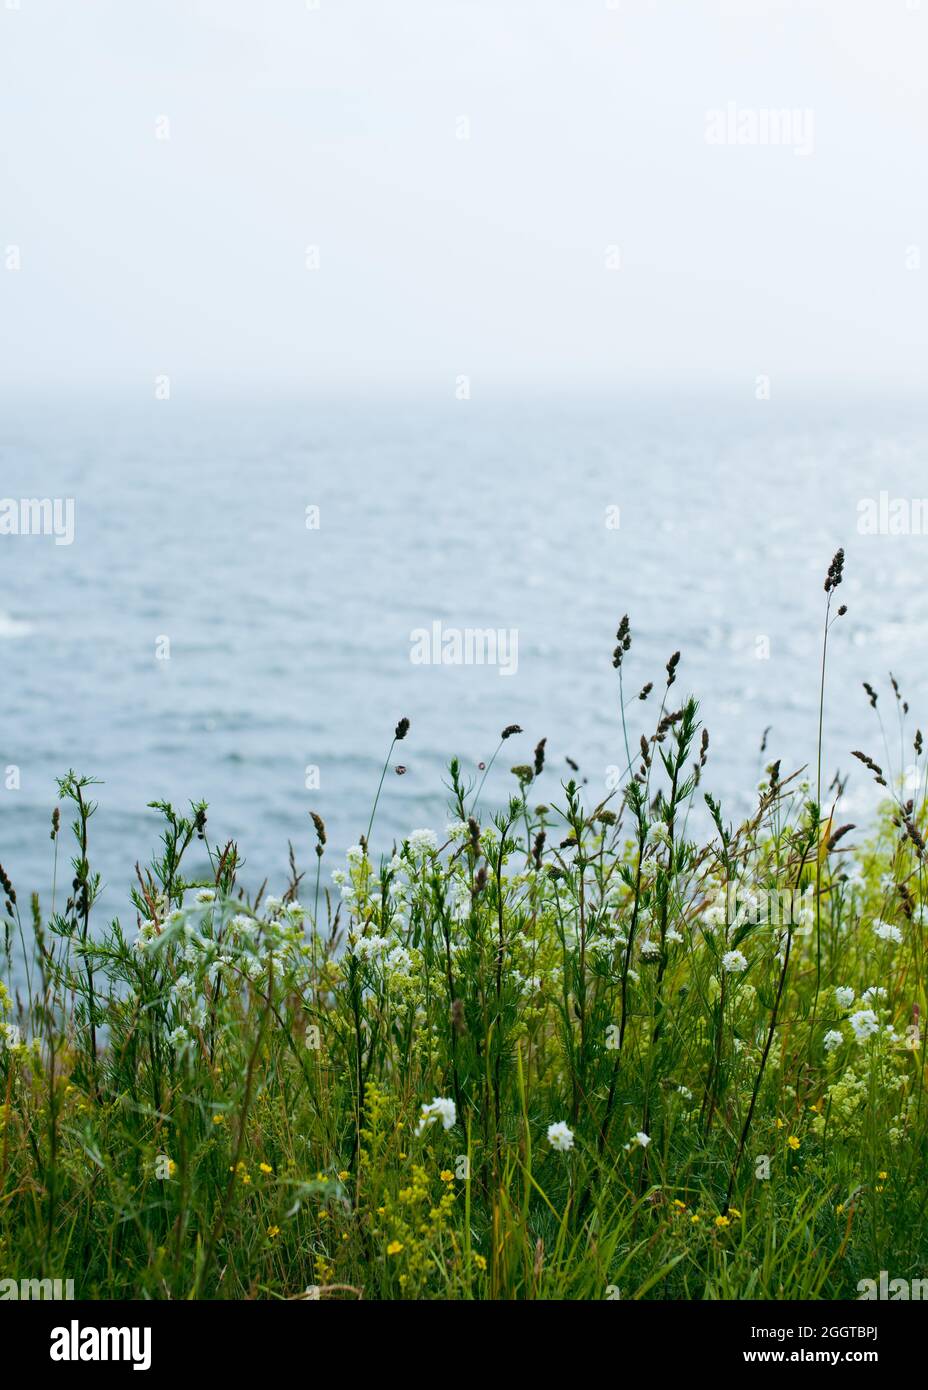 Northern landscape - field of wild flowers up on a cliff by a foggy sea. Stock Photo